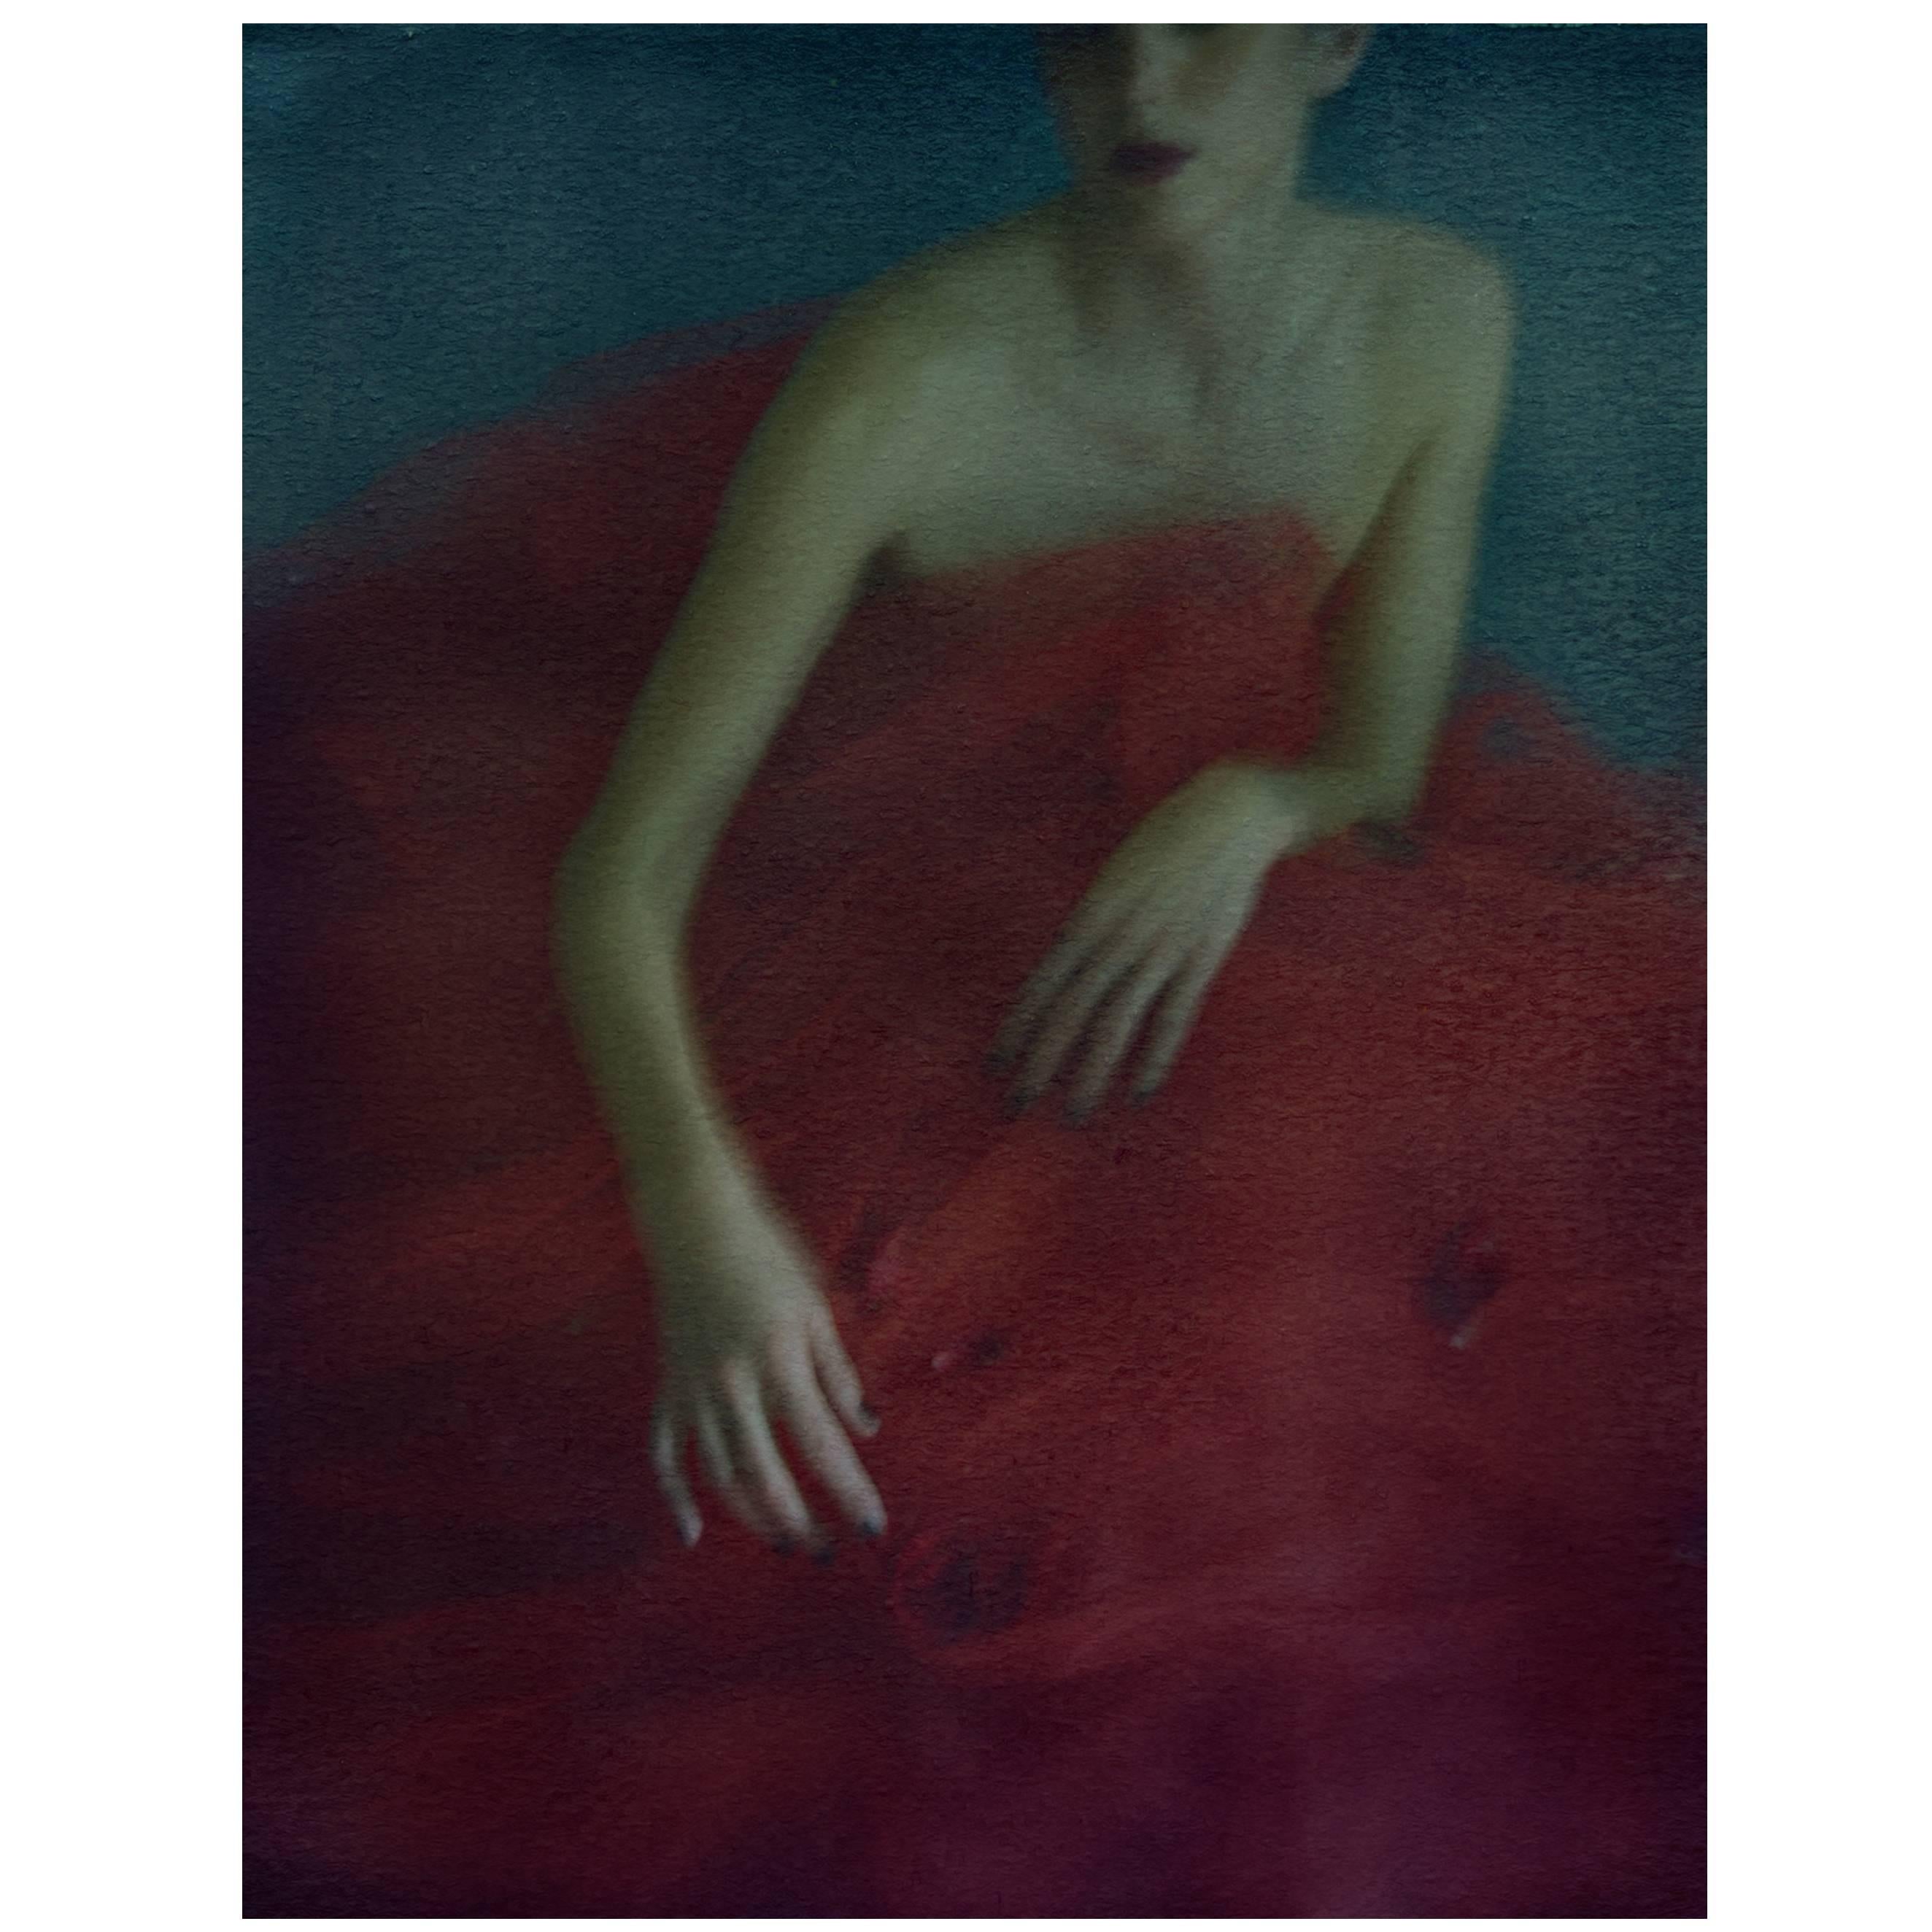 # 5 from the "Divine" Series by Photographer Liliroze, 2013 For Sale